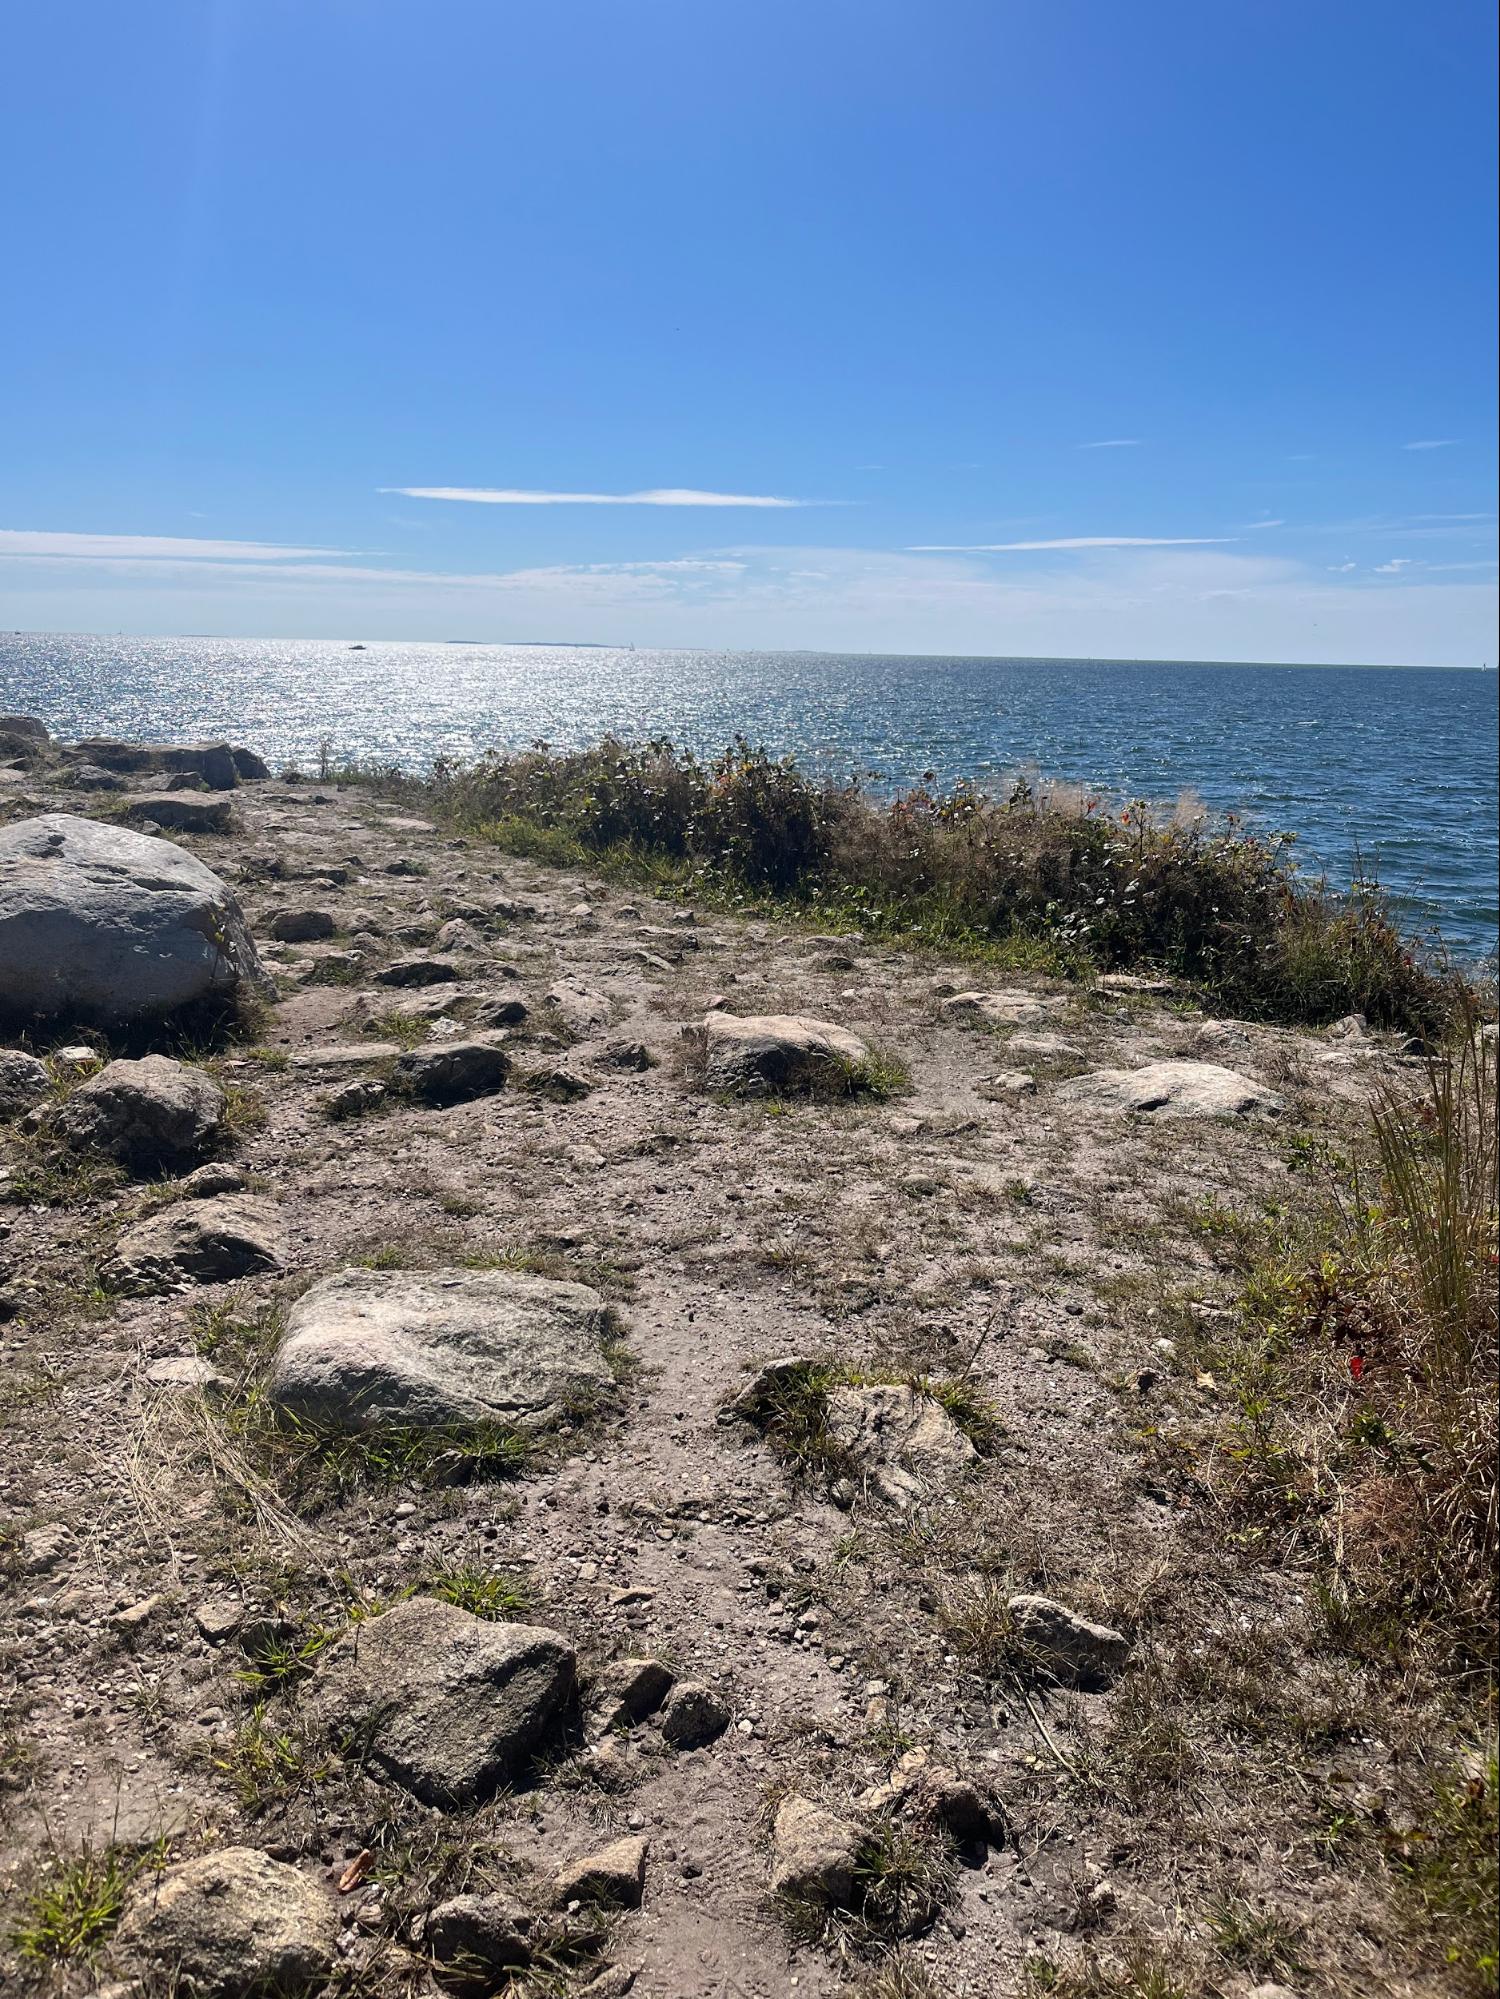 A view of a dry and rocky shoreline with a body of water in the distance.